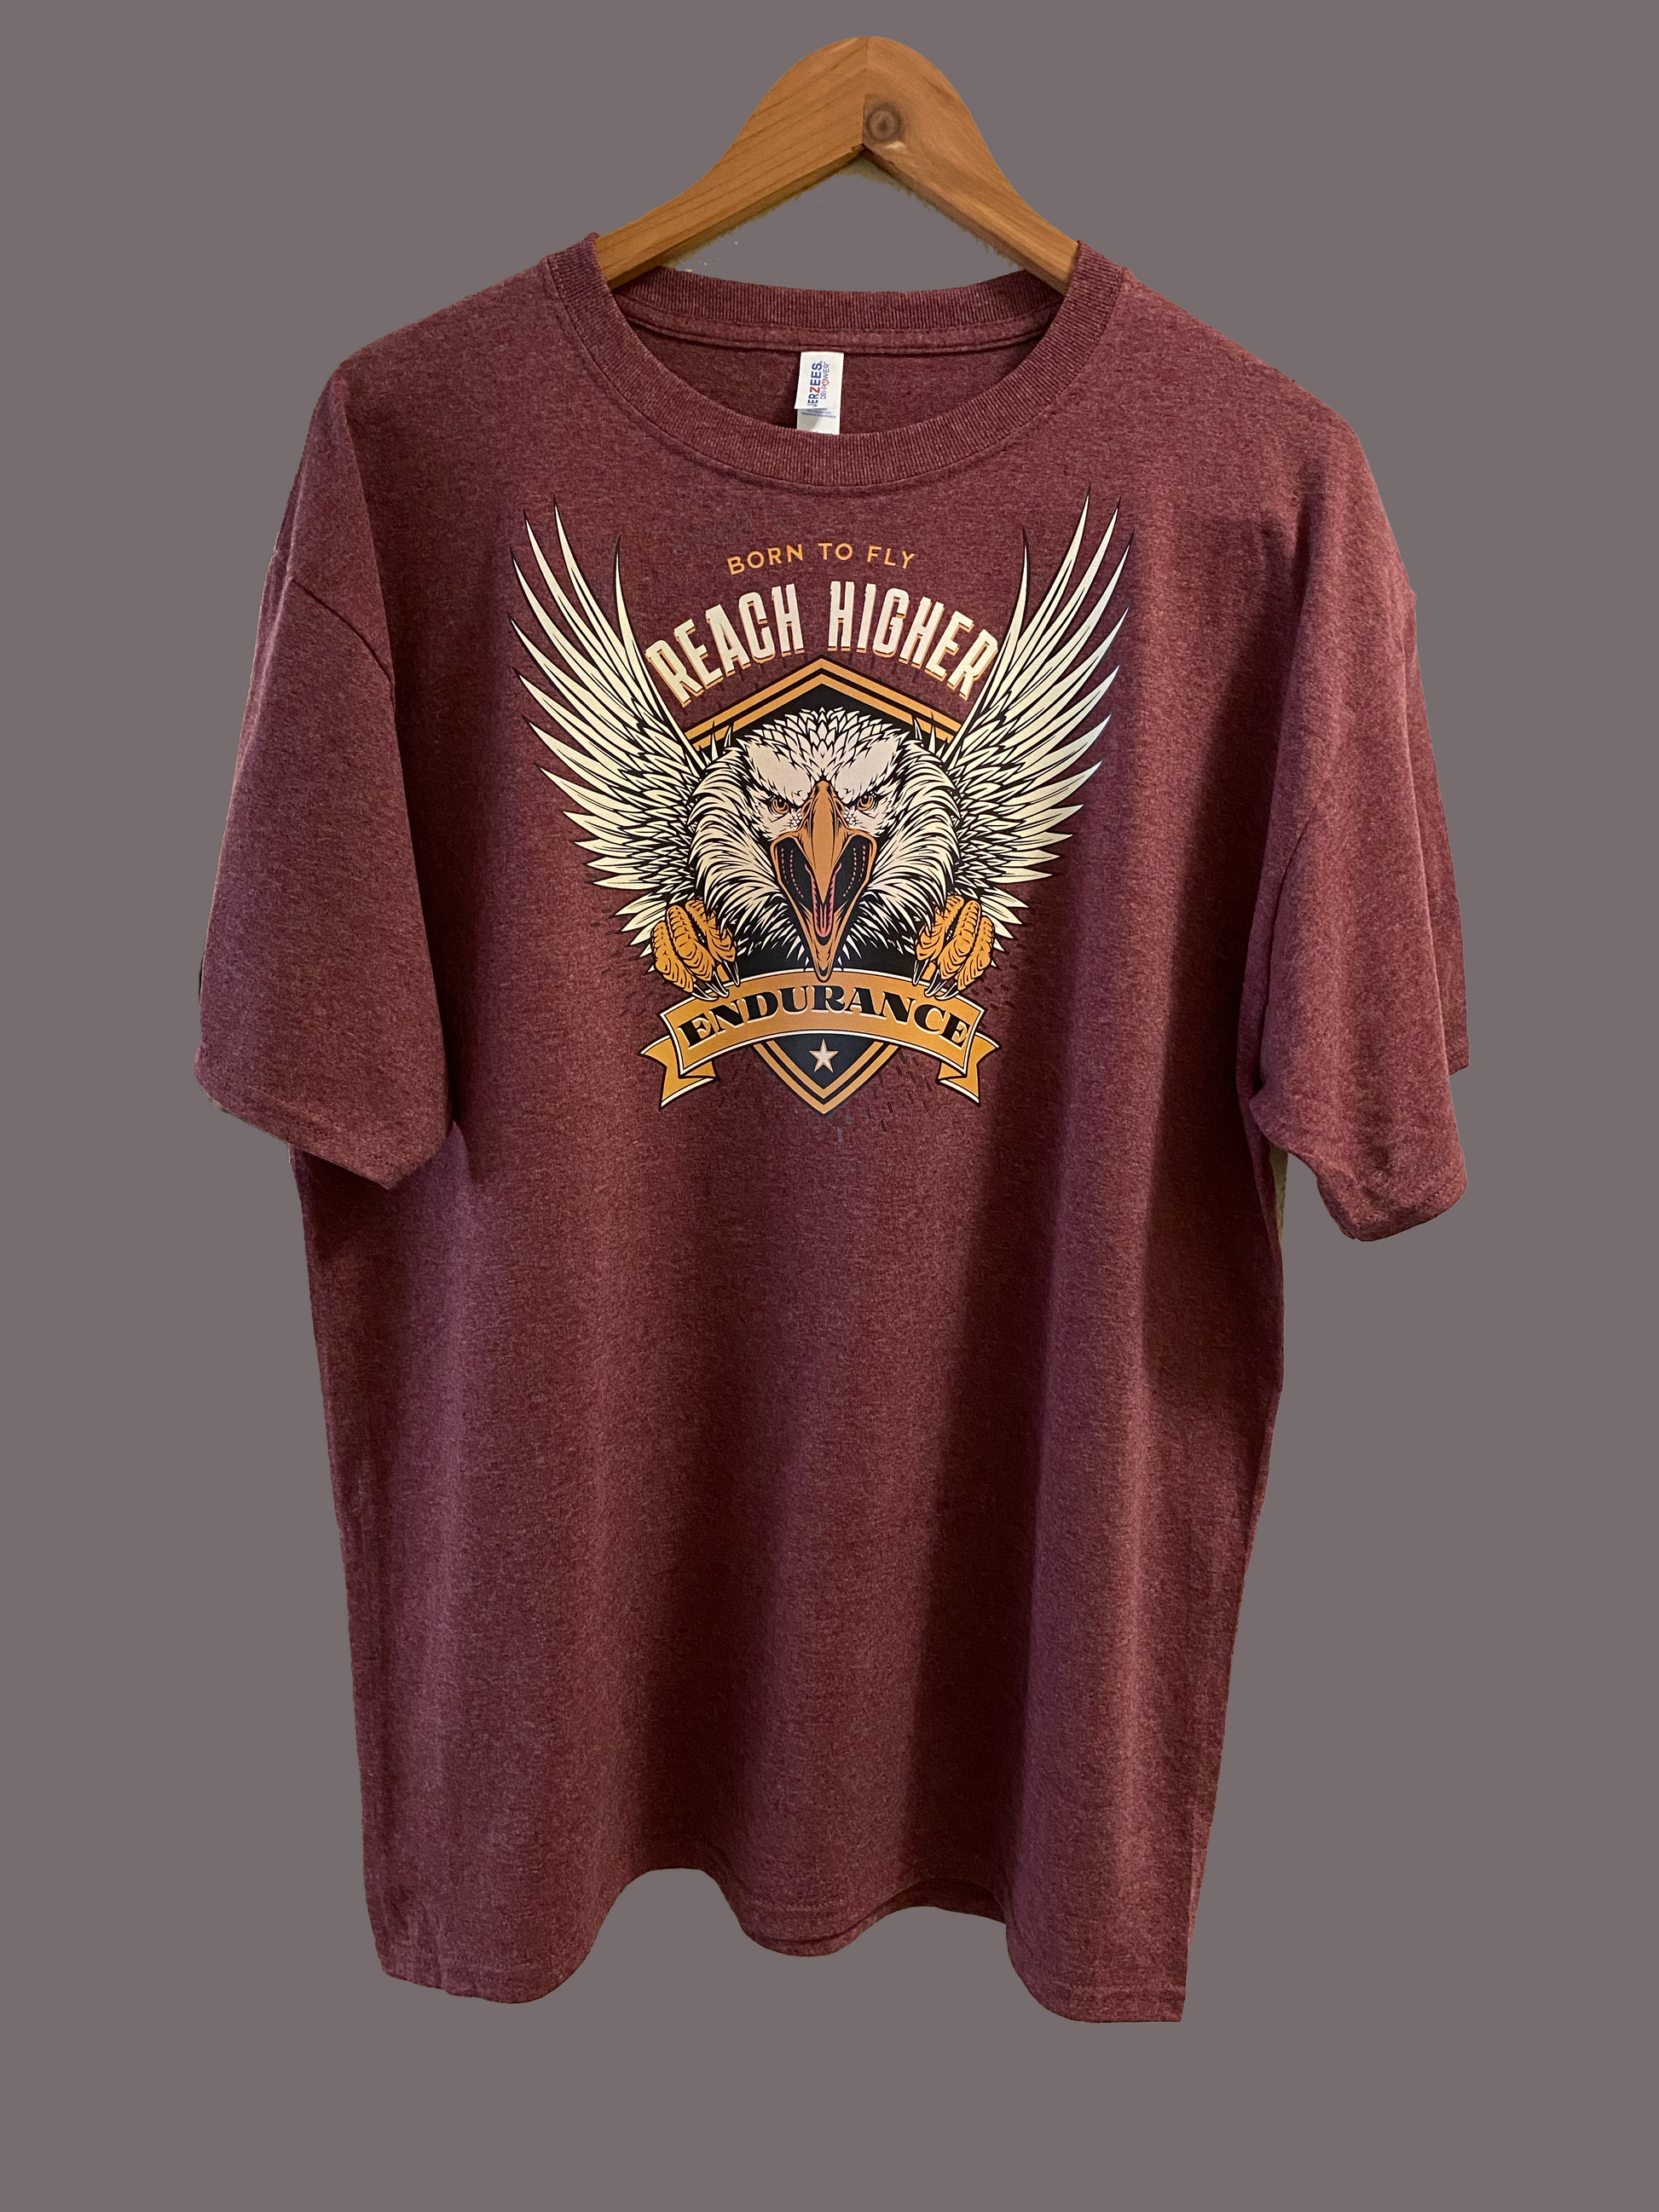 American Eagle Born to Fly T-shirt - Tortuna